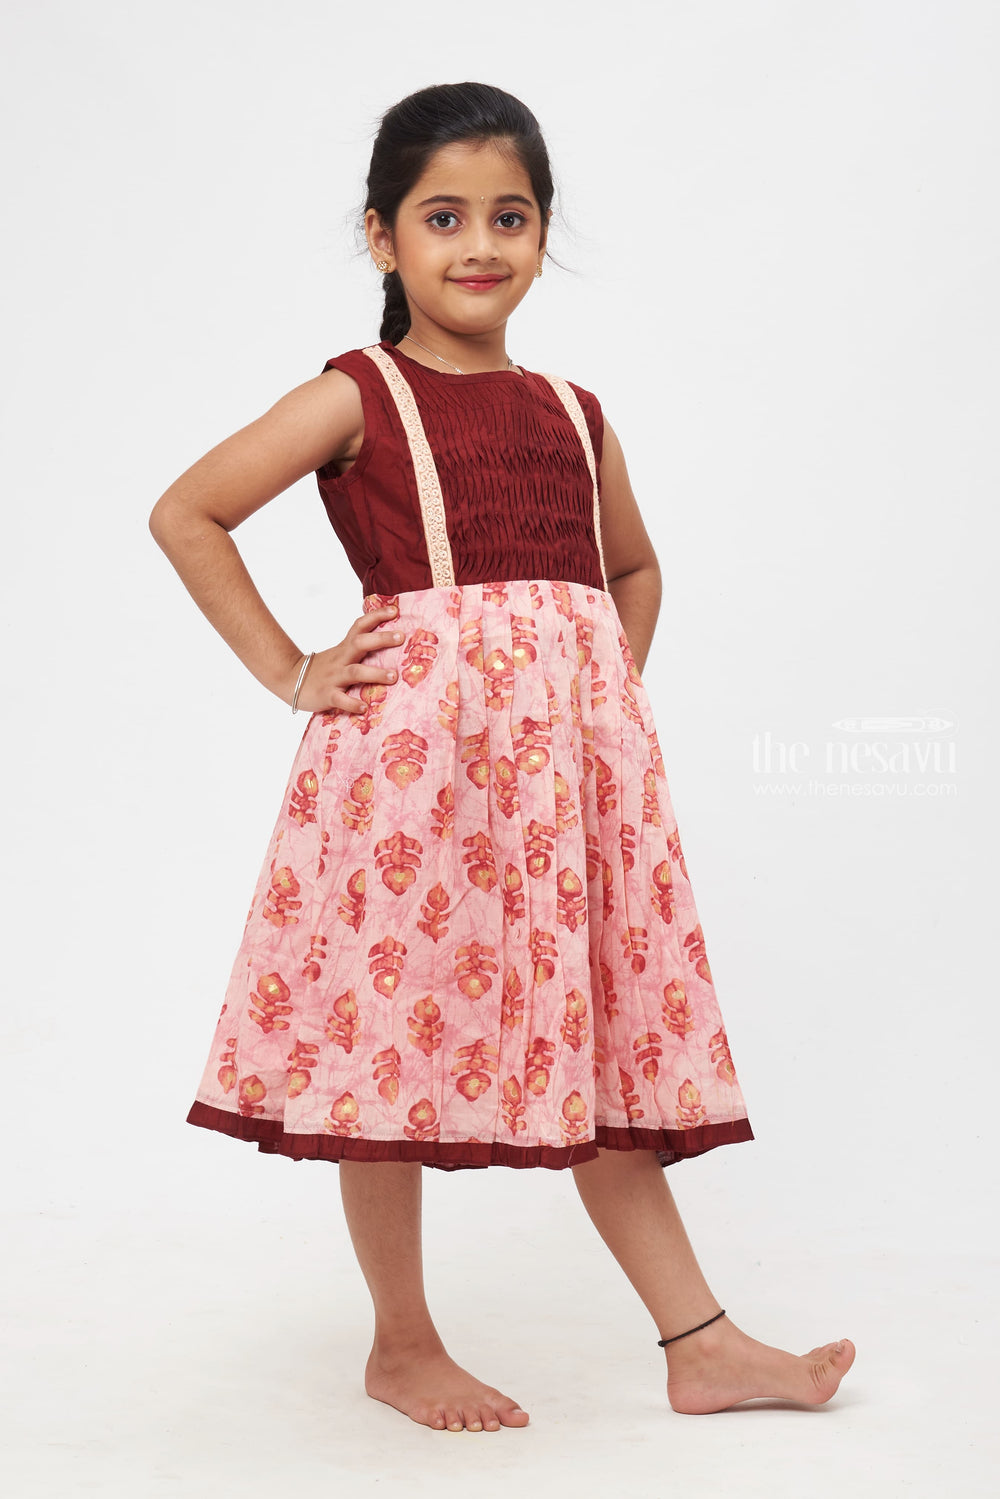 The Nesavu Girls Cotton Frock Pink Peacock Feather Delight with Lace Accents Cotton Frocks for Girls Nesavu Pink Cotton Dress with Peacock Feather Motifs | Timeless Elegance for Little Girls | The Nesavu